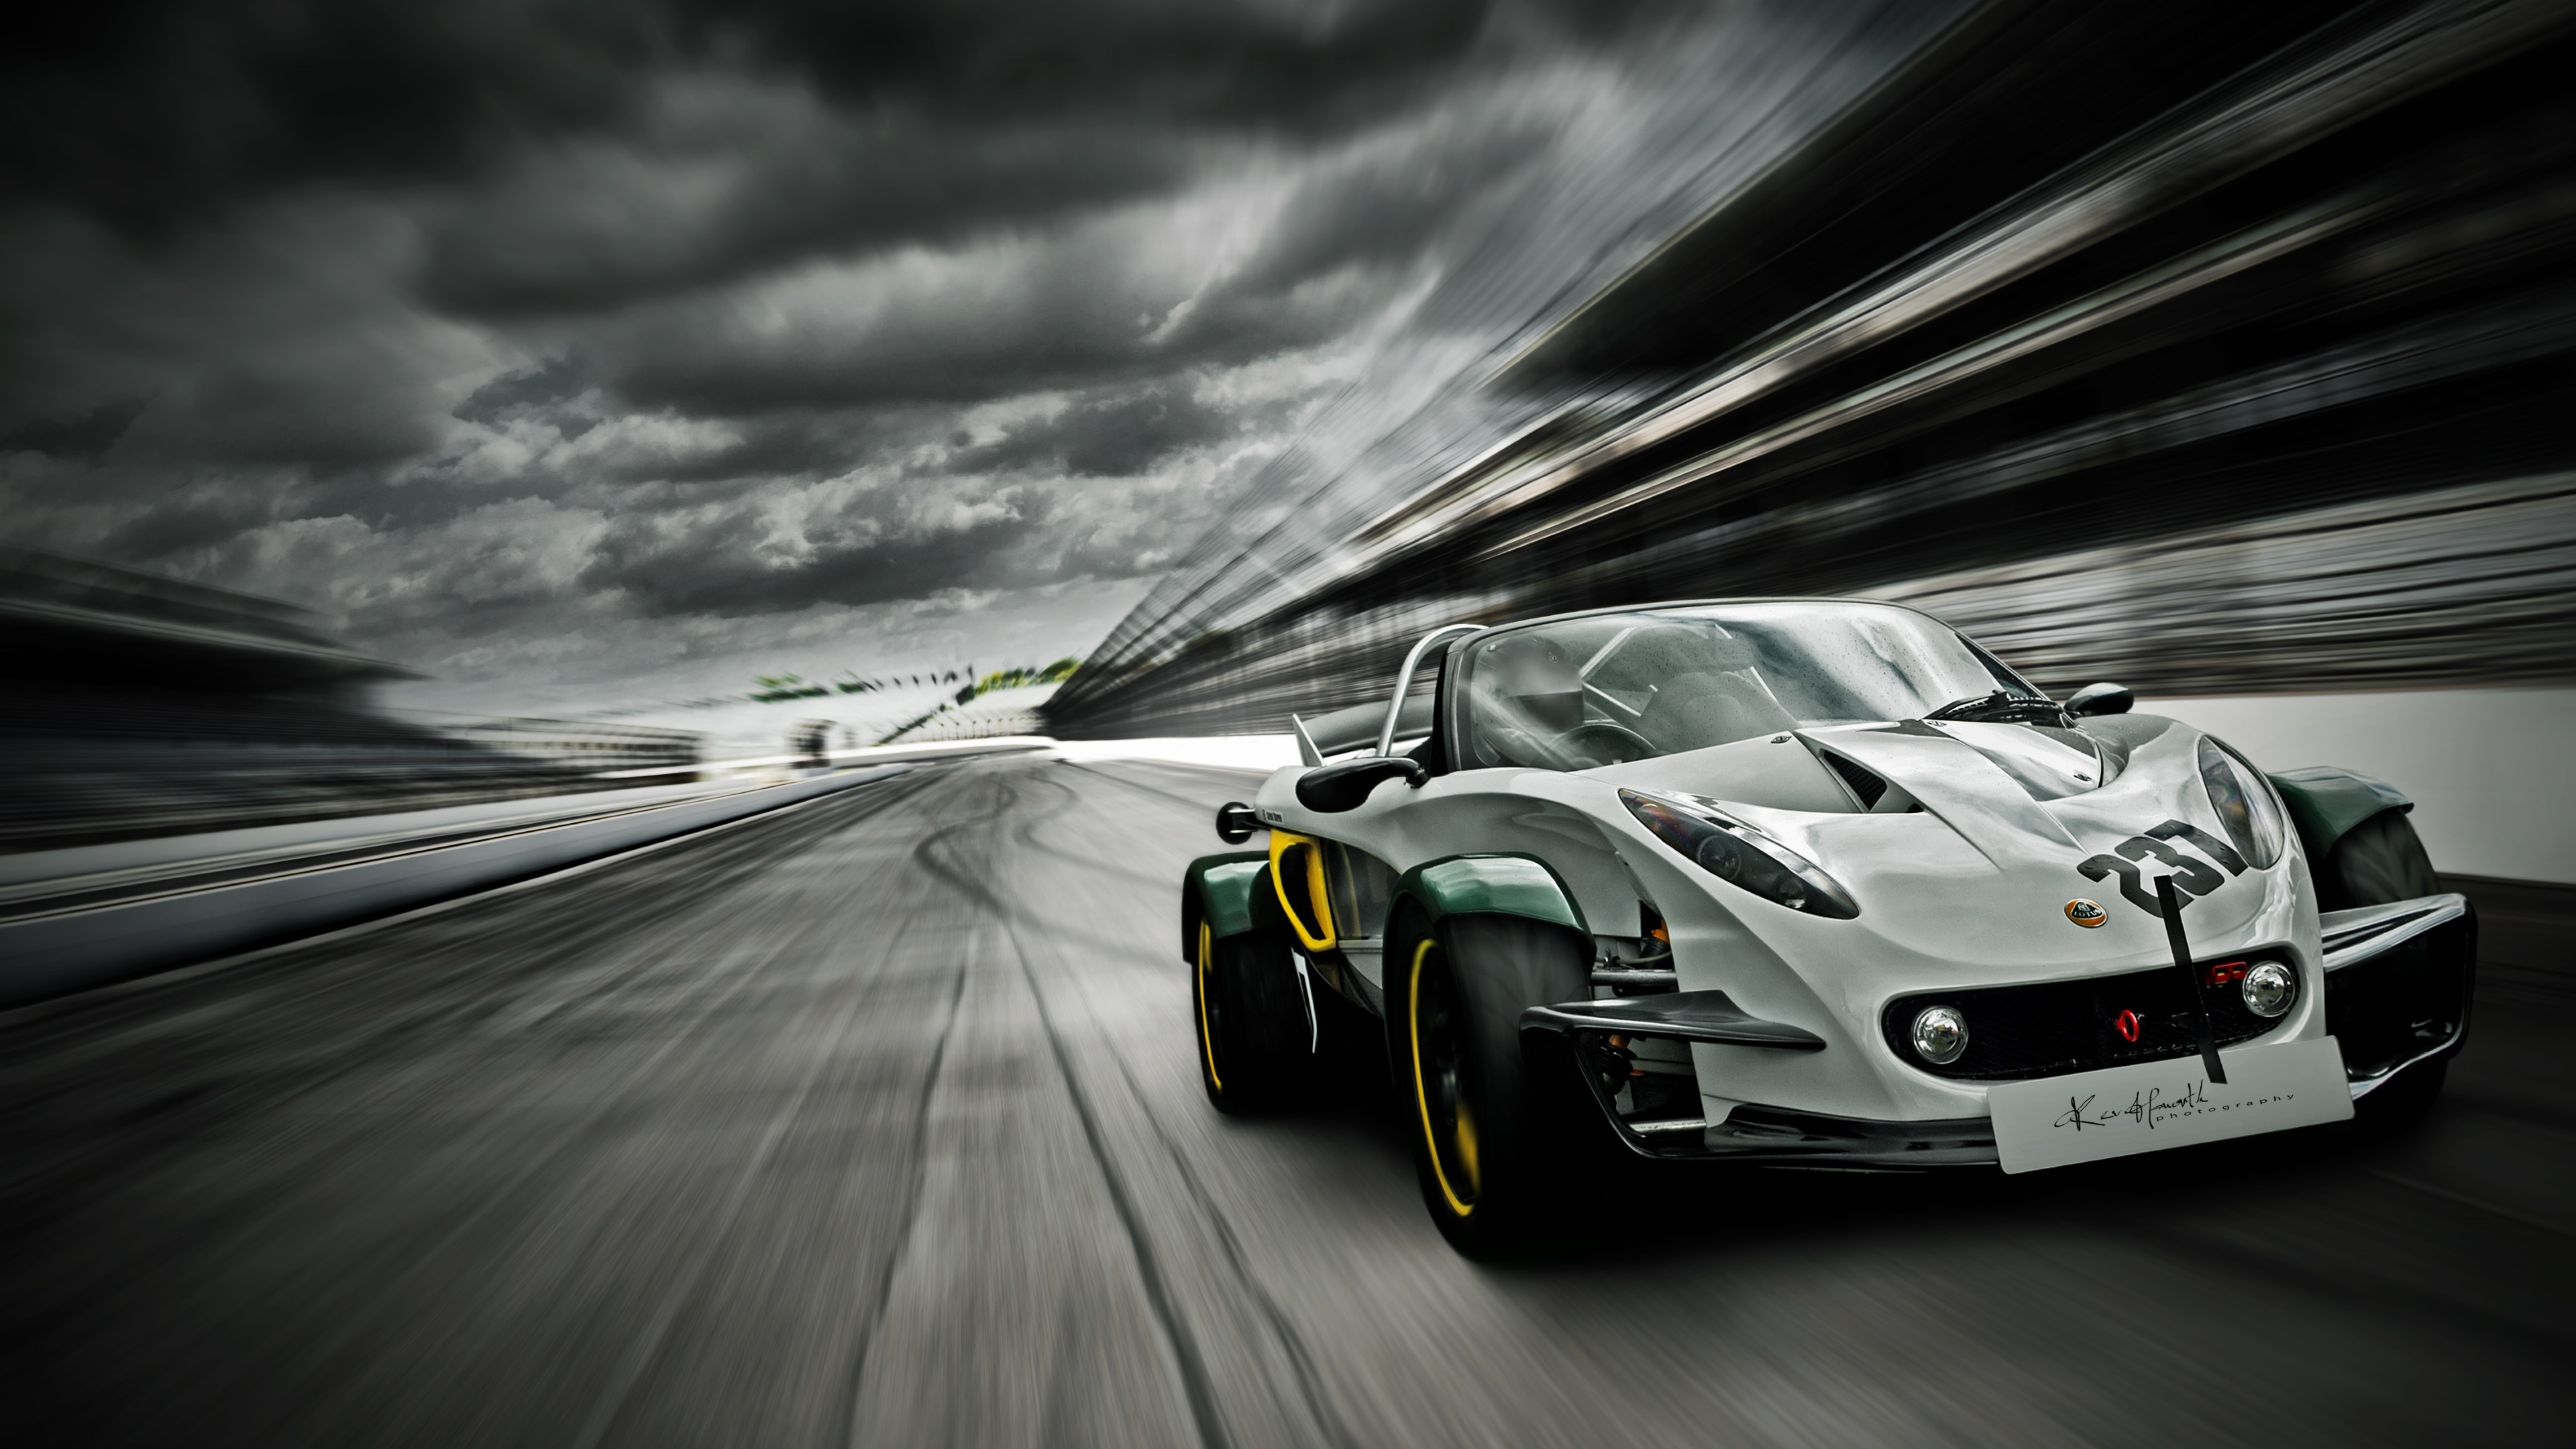 Autocross: Strongly modified Lotus high-performance car, Extreme motorsport. 3840x2160 4K Background.